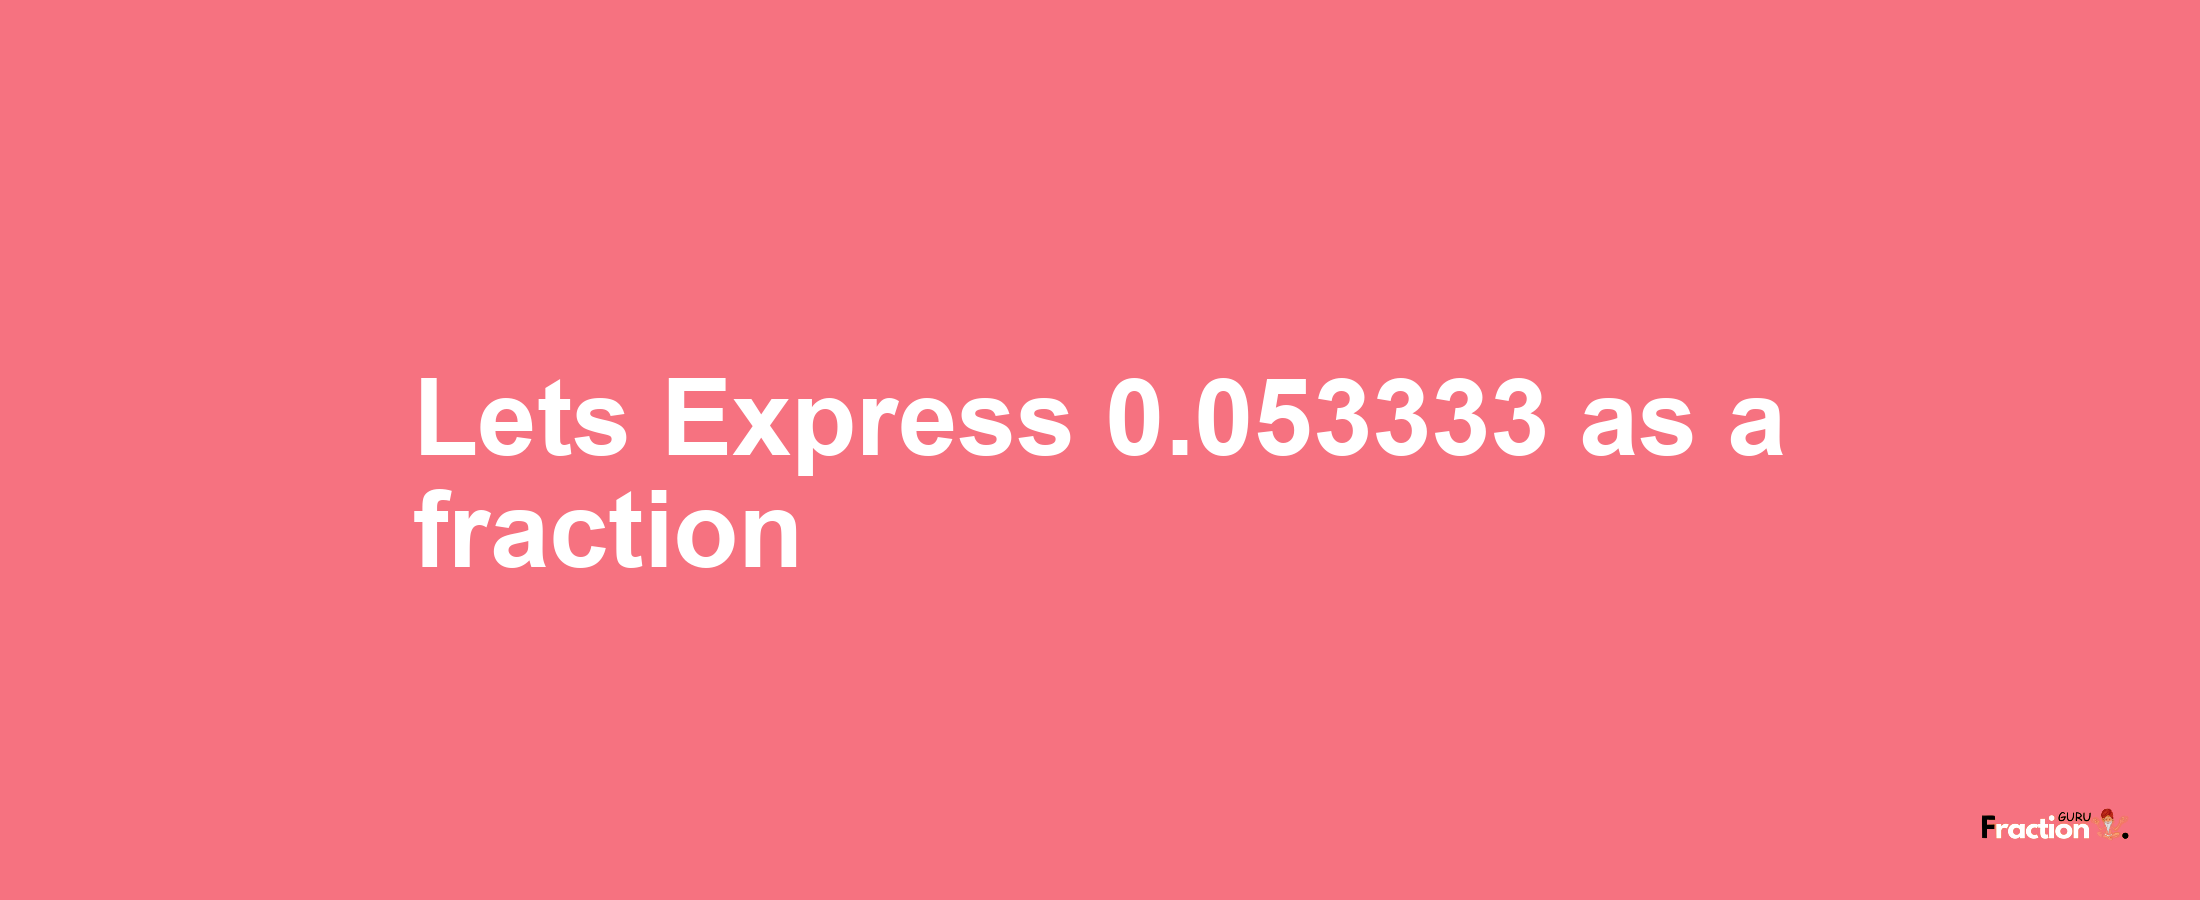 Lets Express 0.053333 as afraction